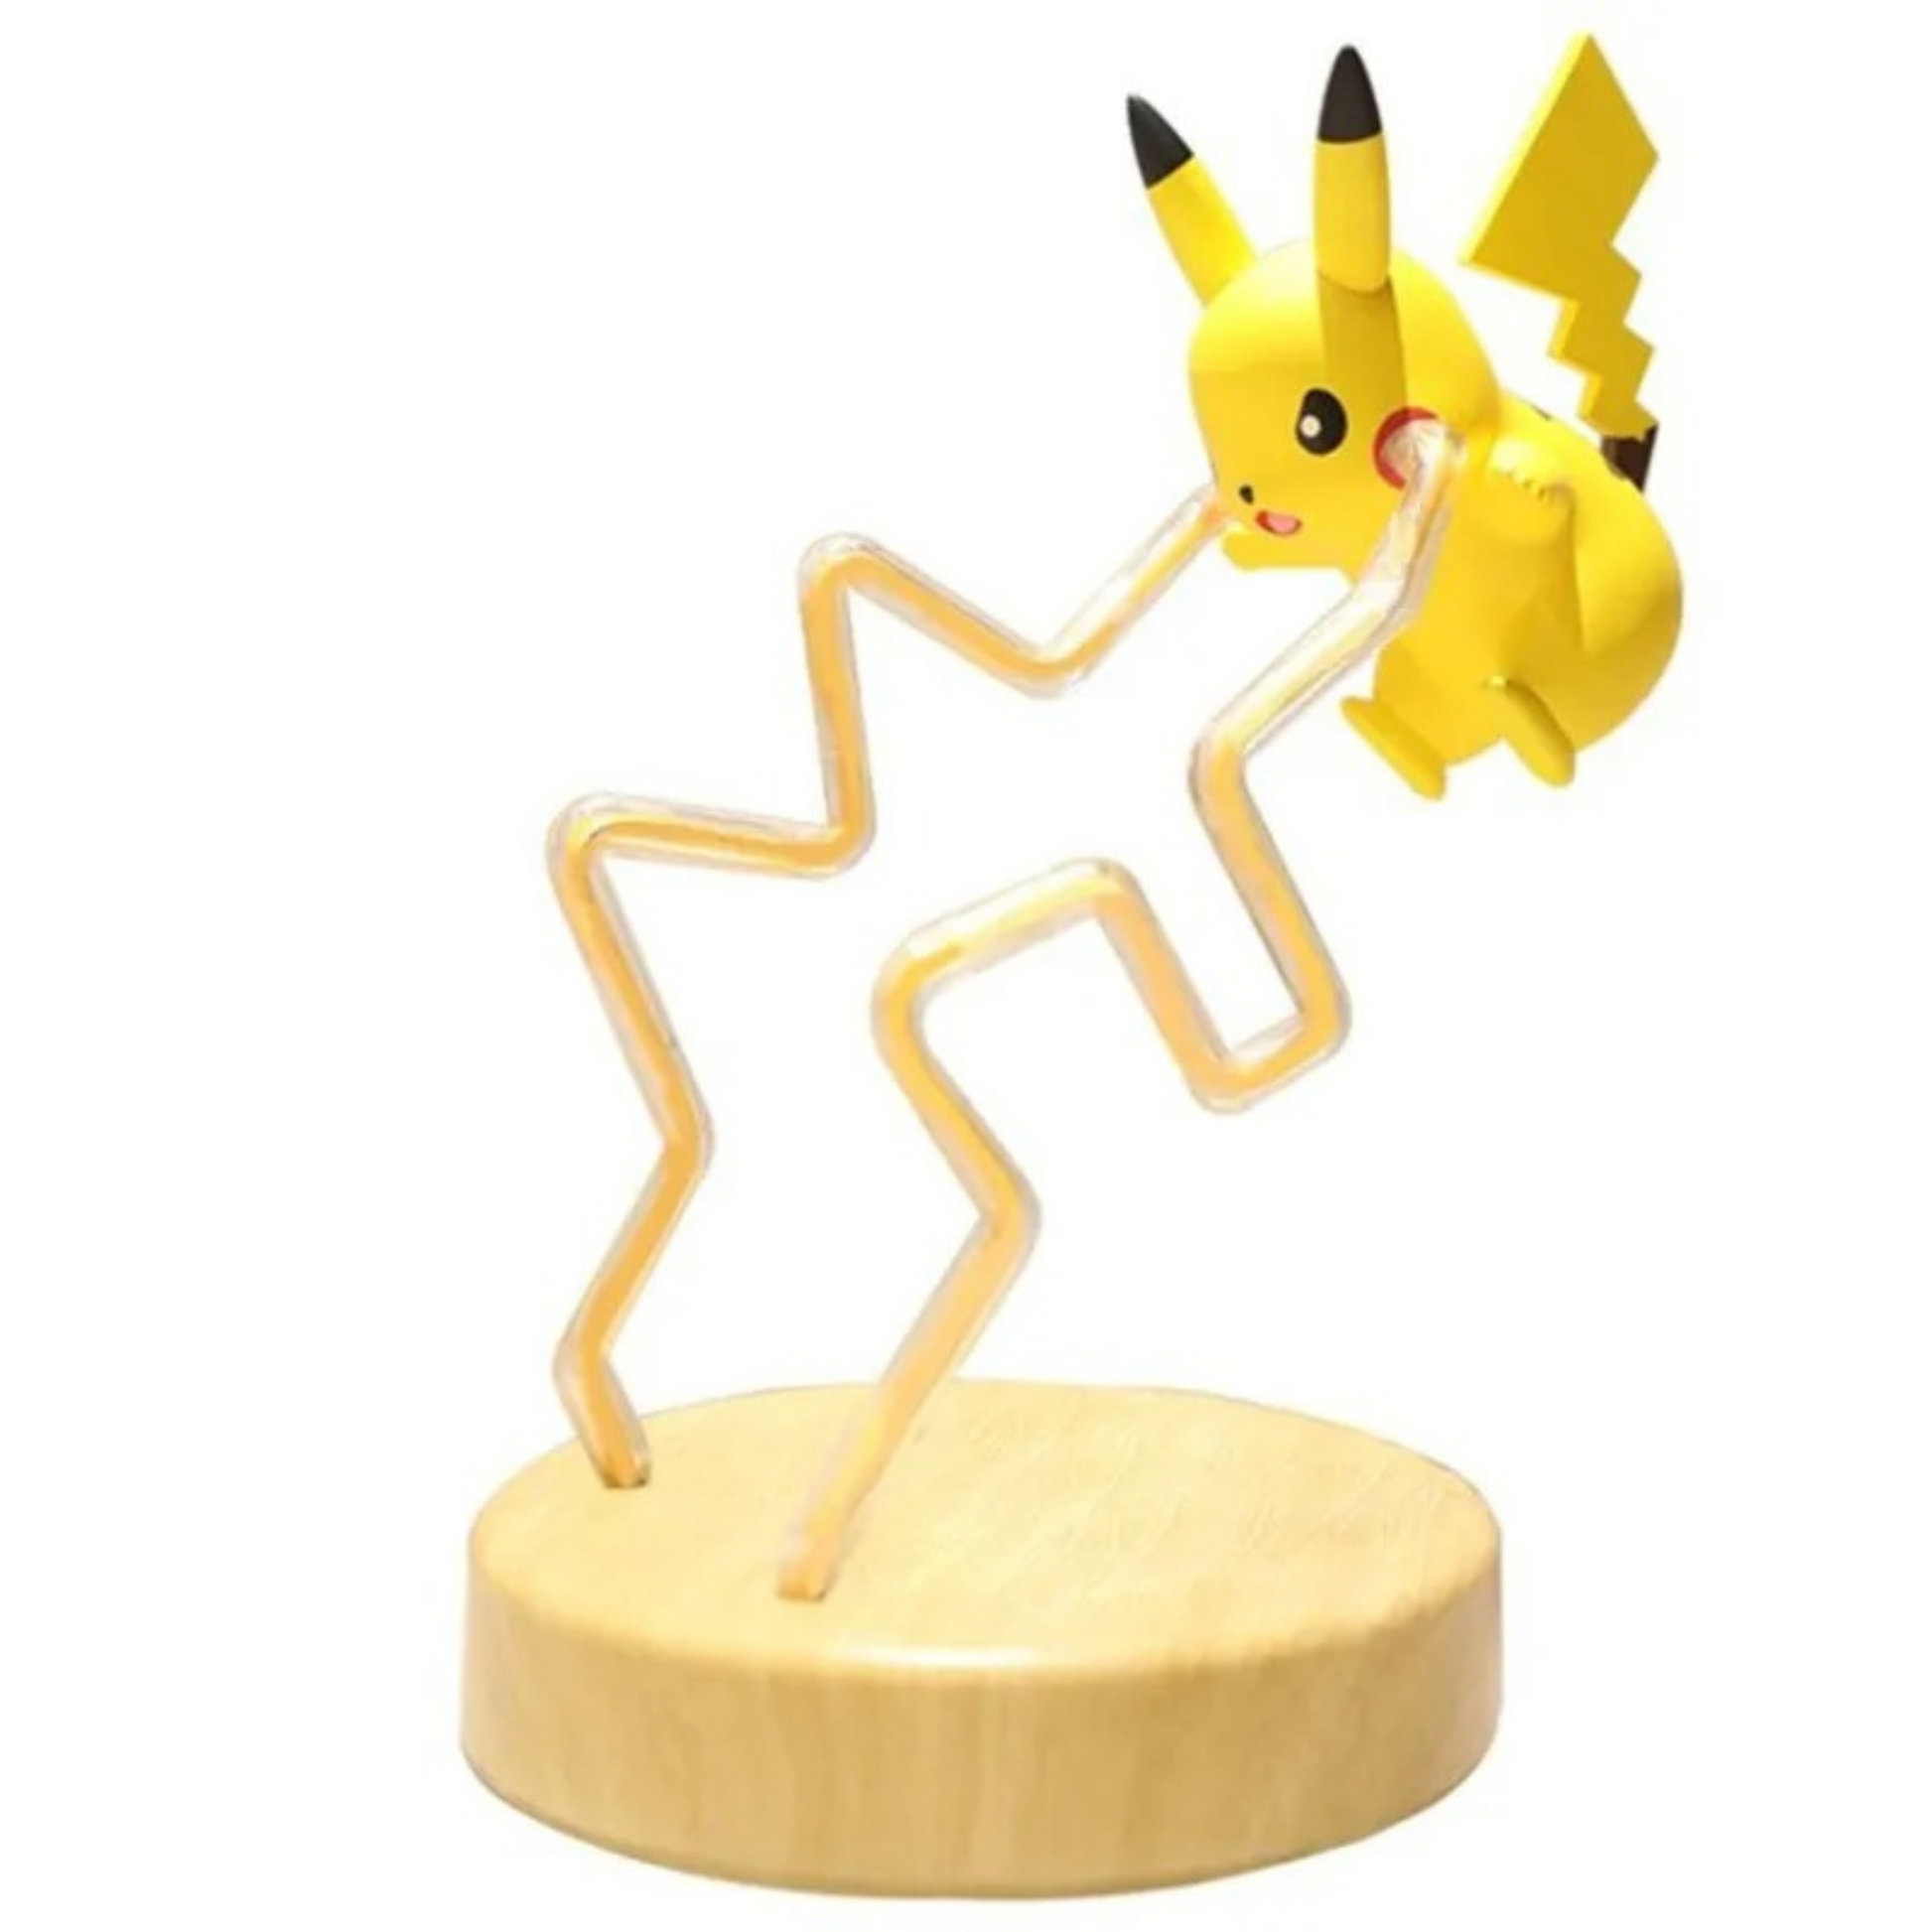 White background- Pikachu Pokemon wireless charger with thunderbolt lightning LED lights | Perfect as a night light lamp decor gift for Pokémon fans.